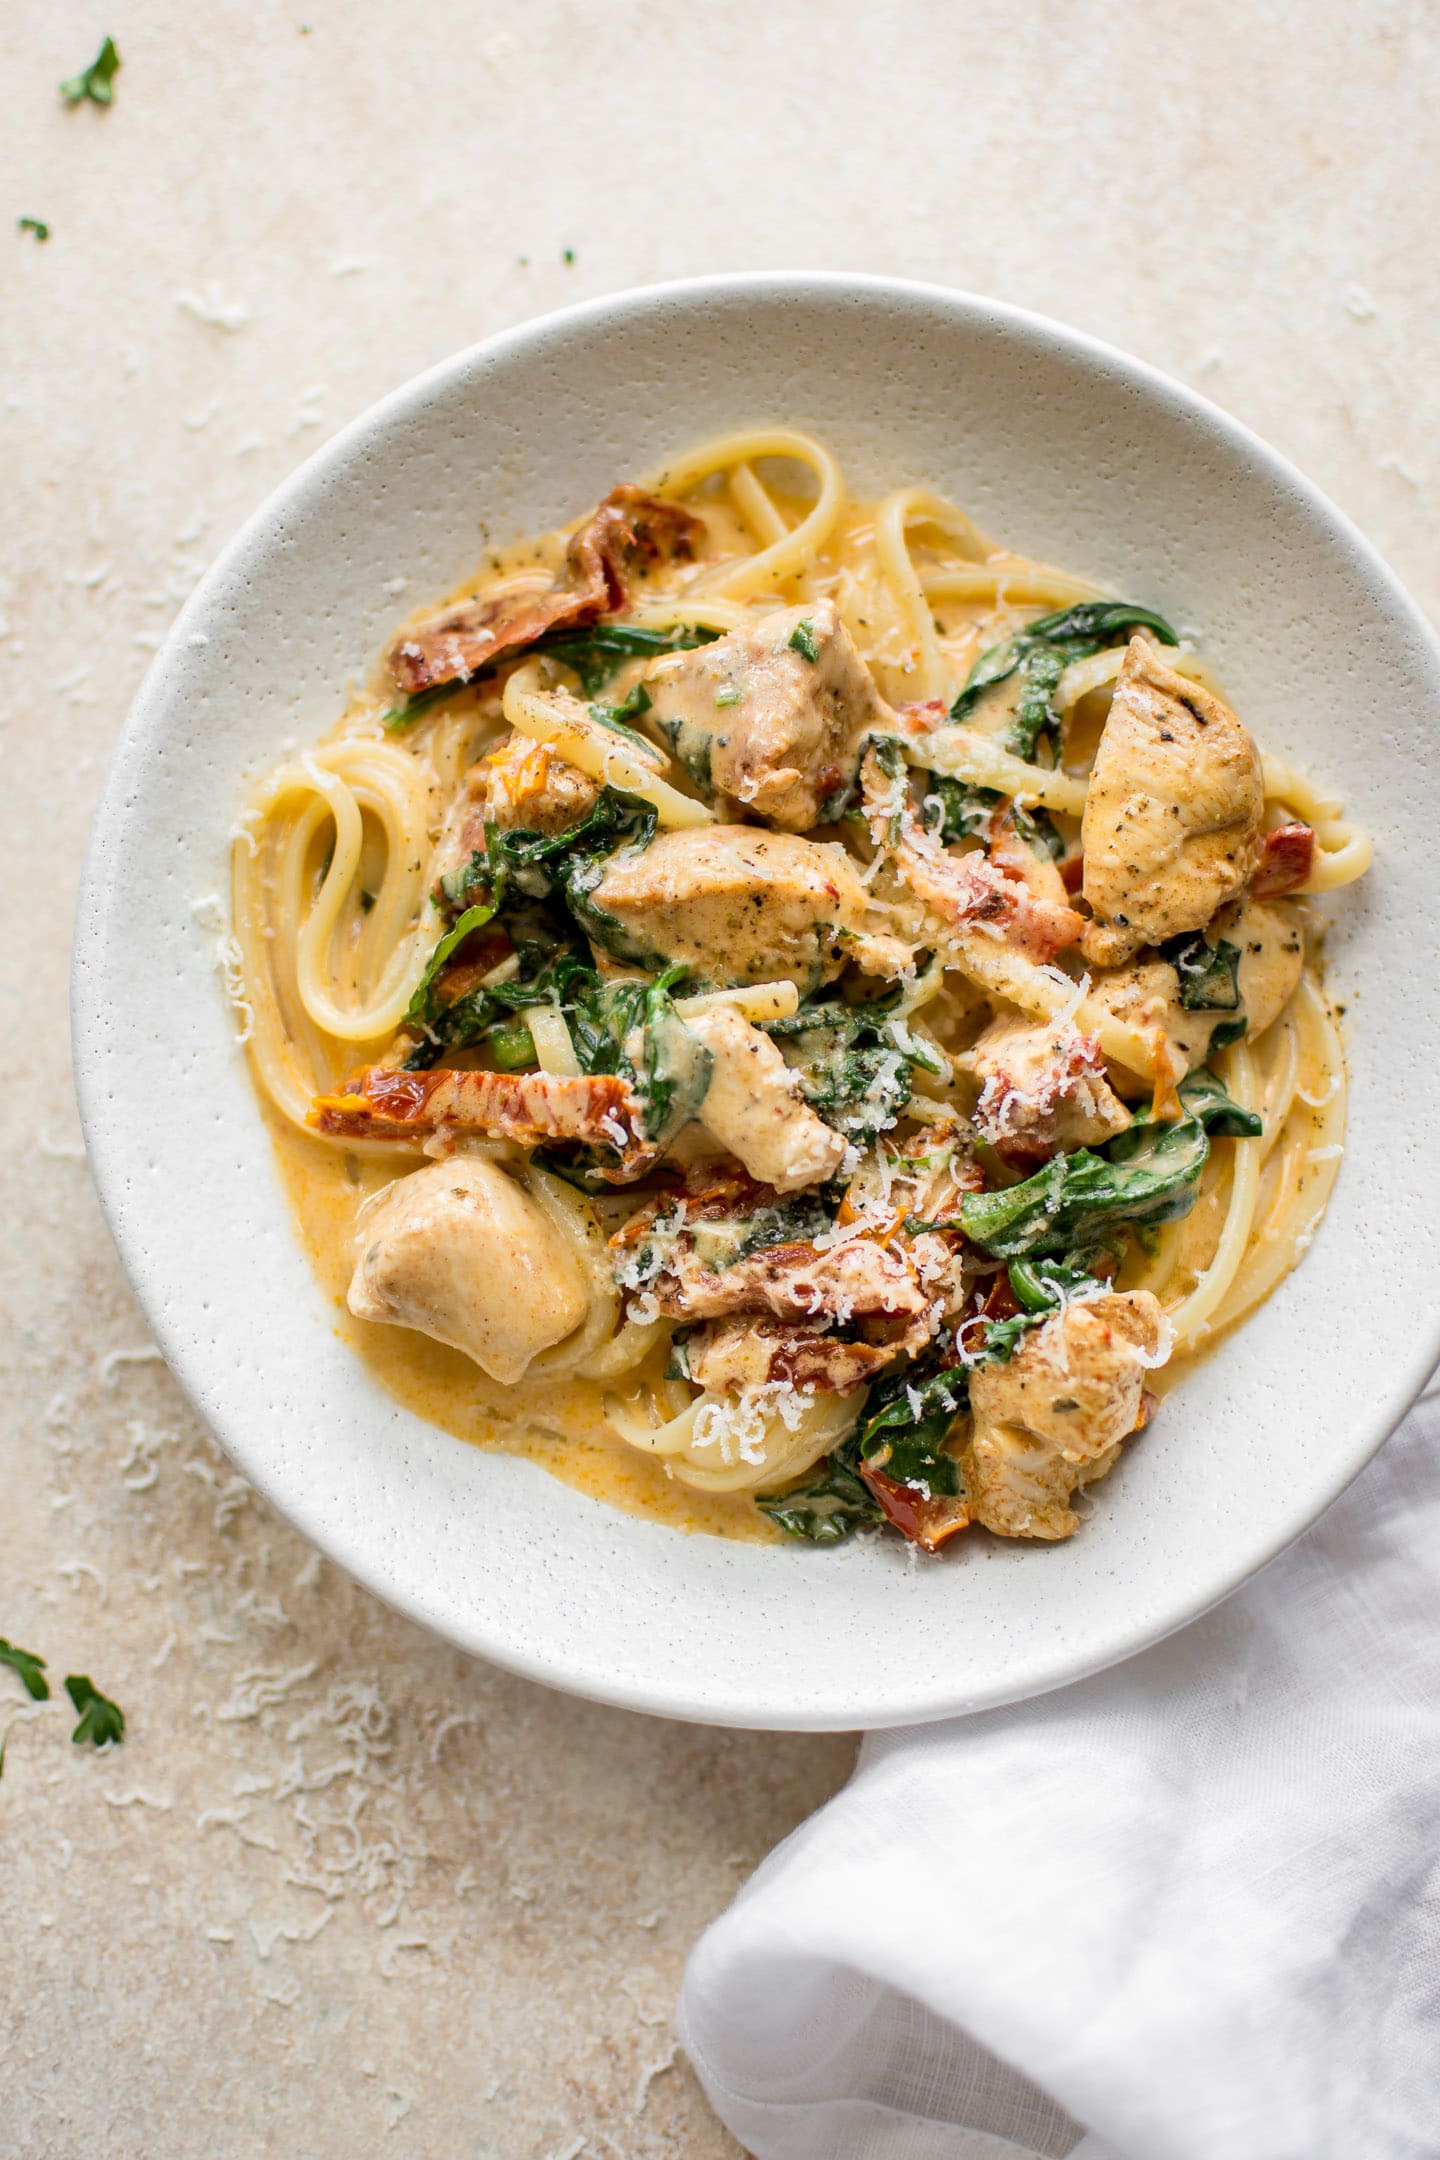 This creamy Tuscan chicken pasta recipe is even better than the Olive Garden's! You can quickly make this easy chicken, spinach, and sun-dried tomato pasta with a creamy garlic sauce at home in under half an hour!